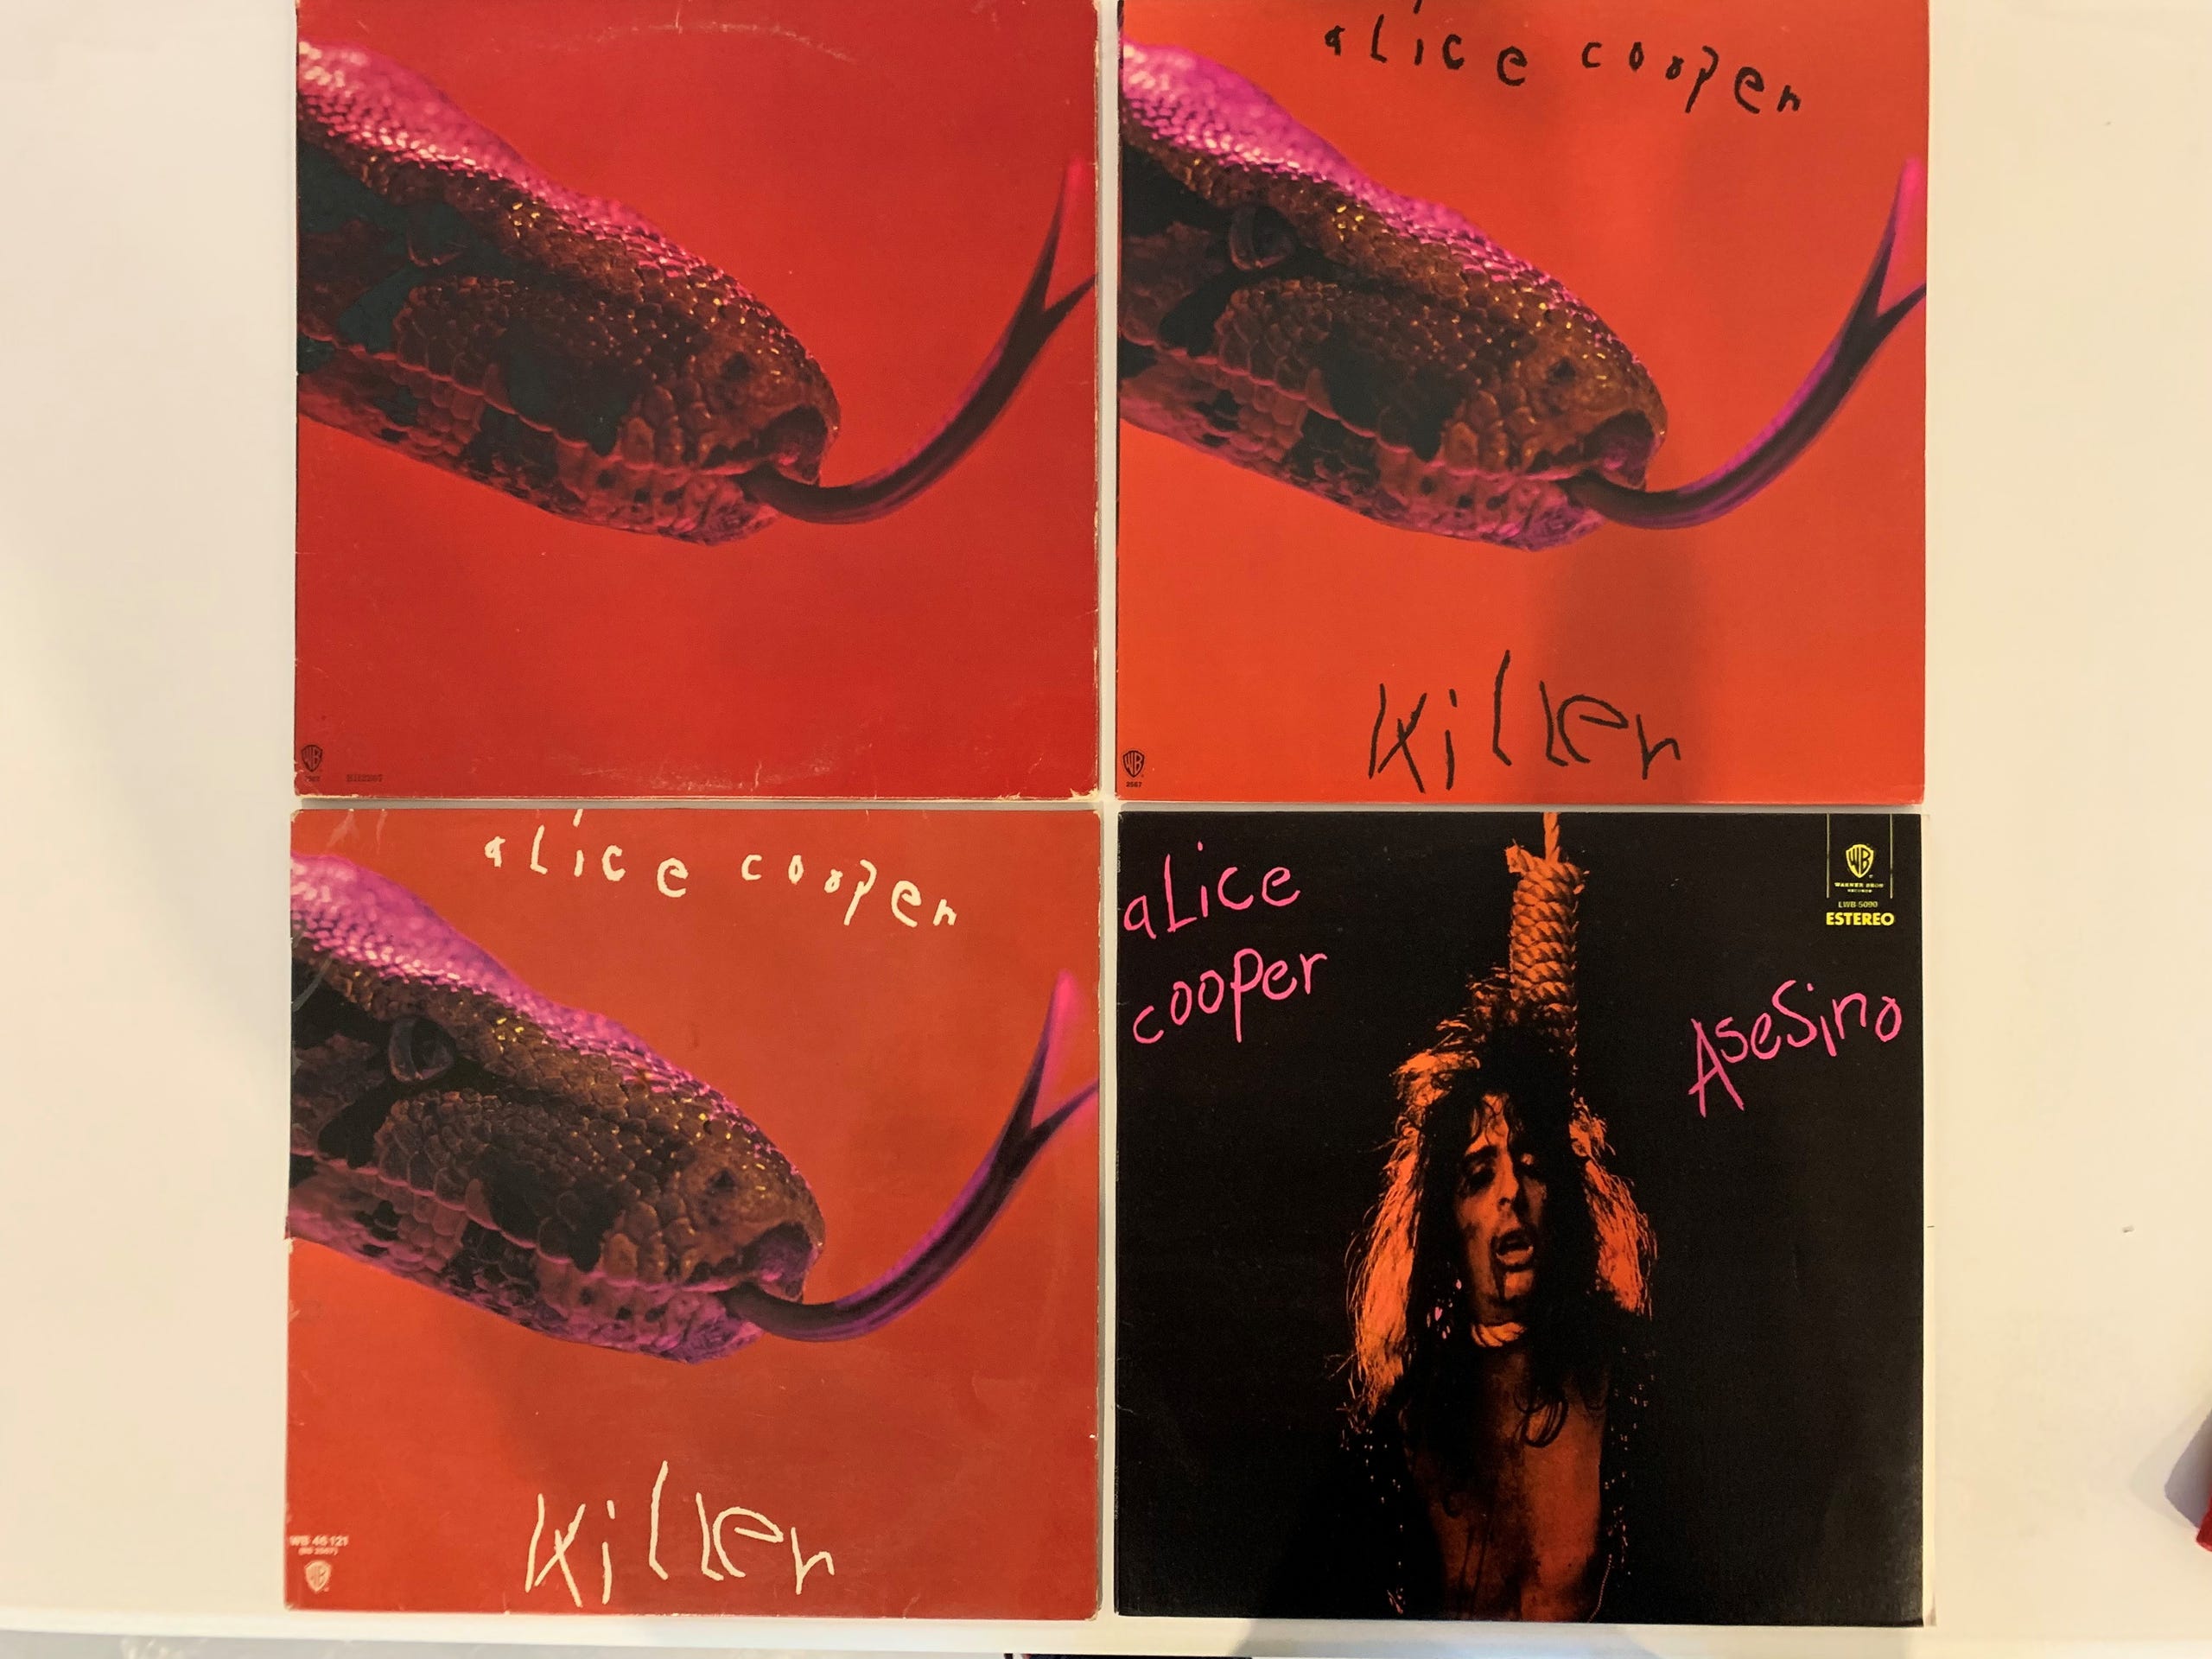 Four versions of the Alice Cooper "Killer" album art. Clockwise from upper left: Columbia House edition, standard U.S. issue, German issue and Mexican issue.